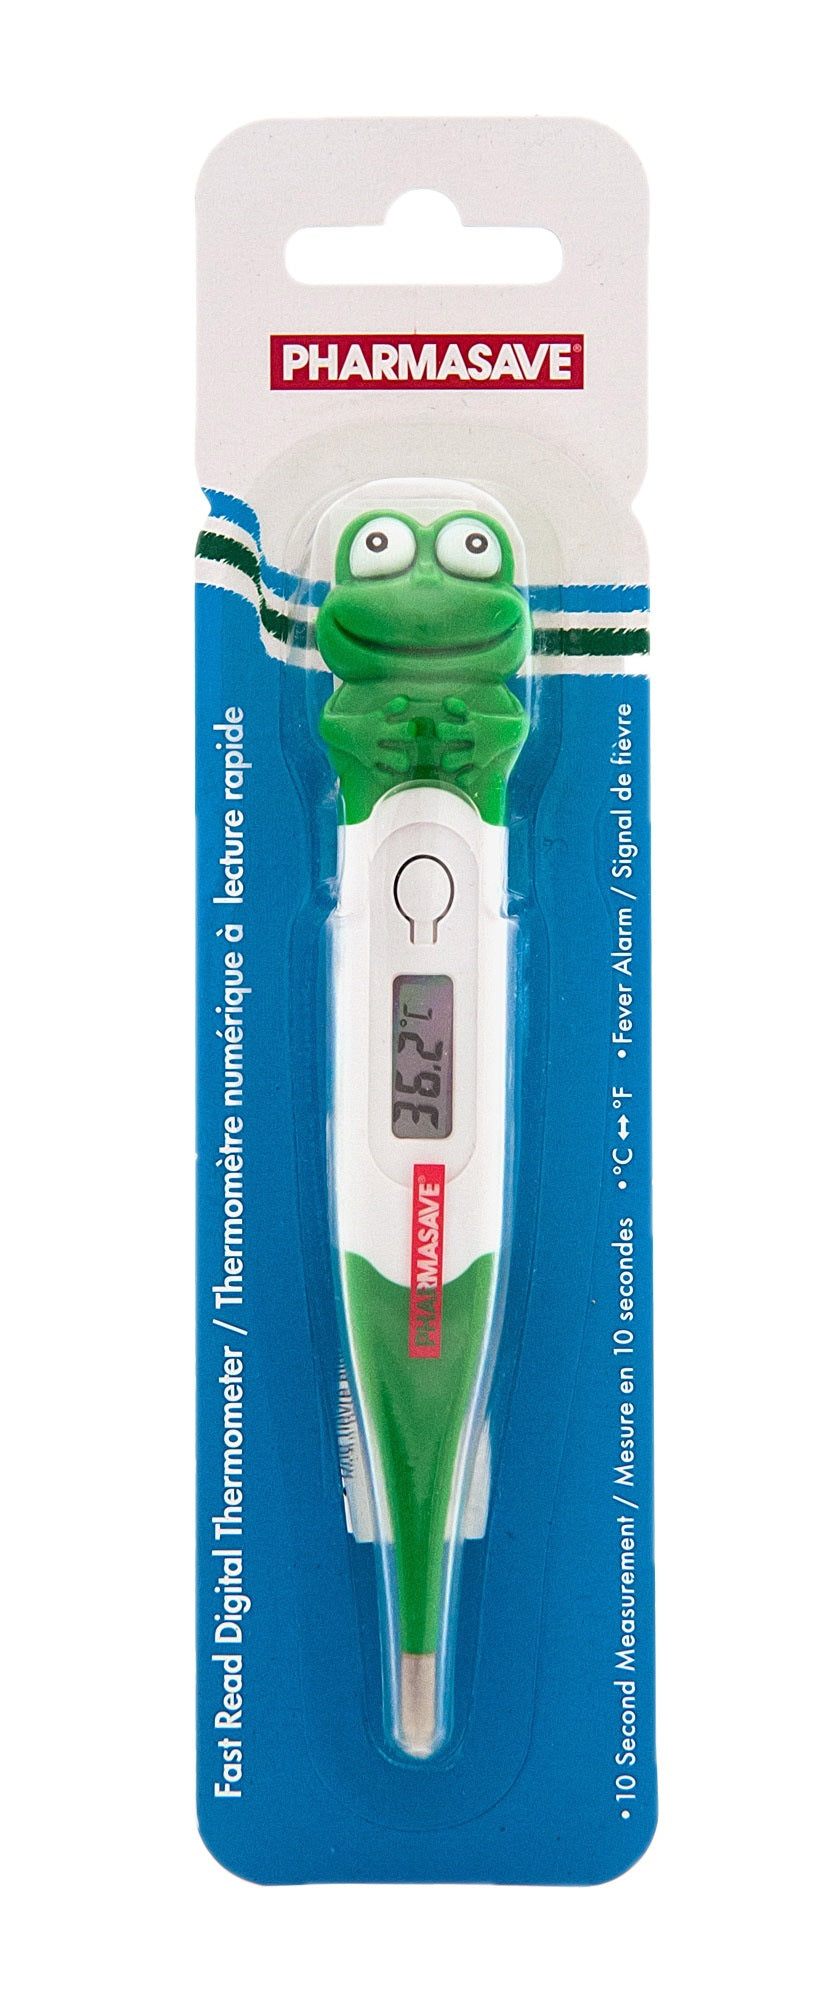 Thermomètre numérique Digital thermometer - ZooMed